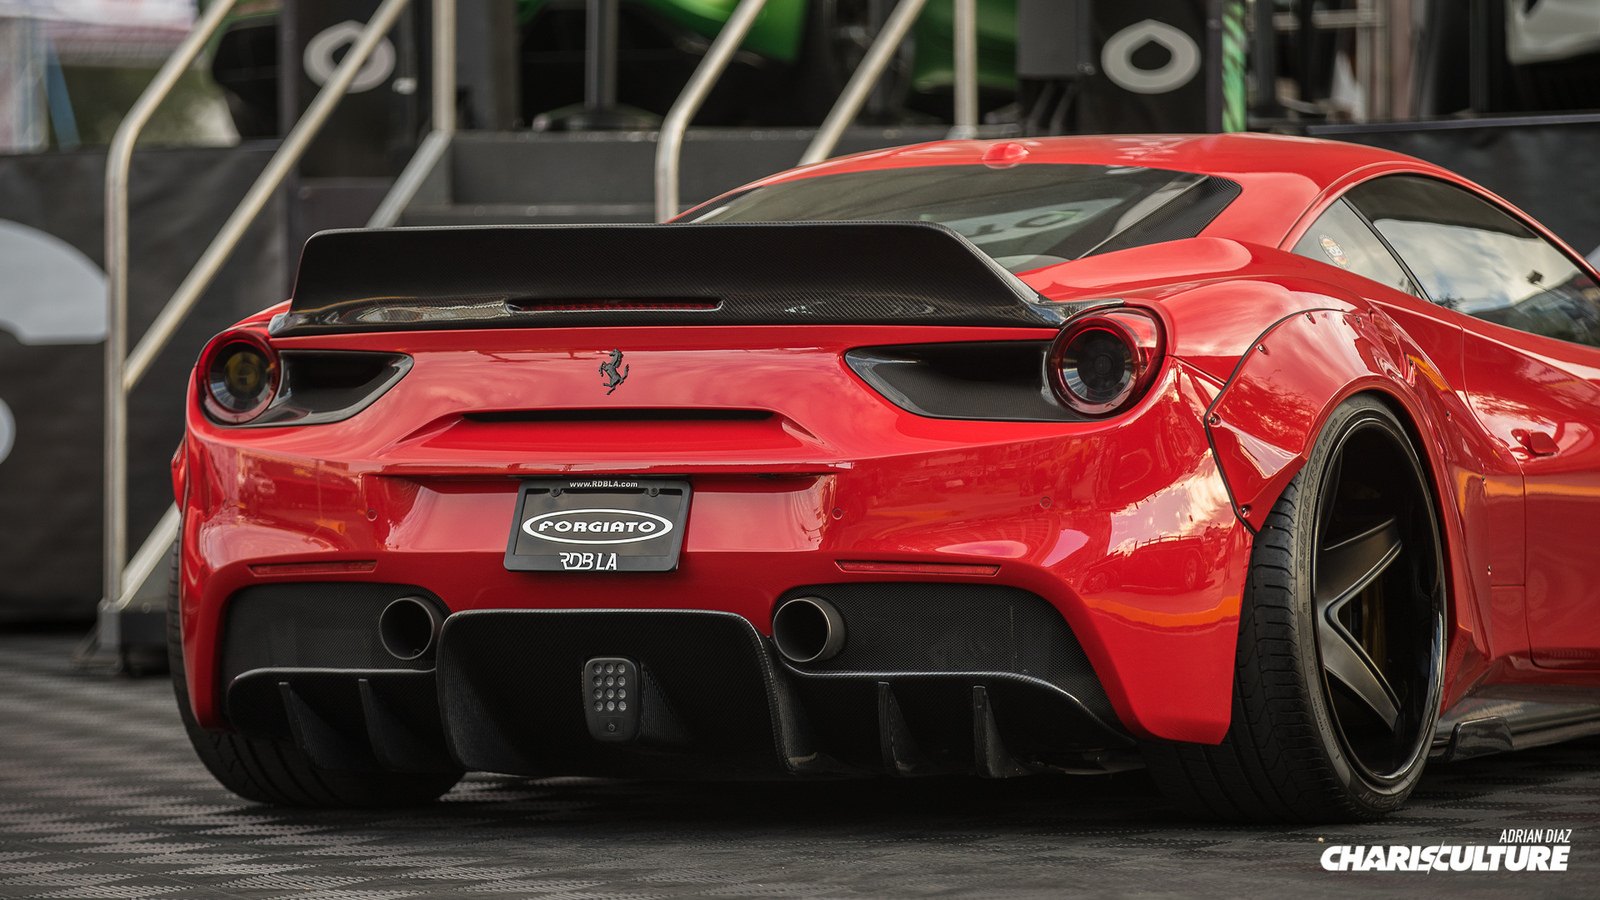 Carbon Fiber Rear Diffuser on Red Ferrari 488 - Photo by The Charis Culture